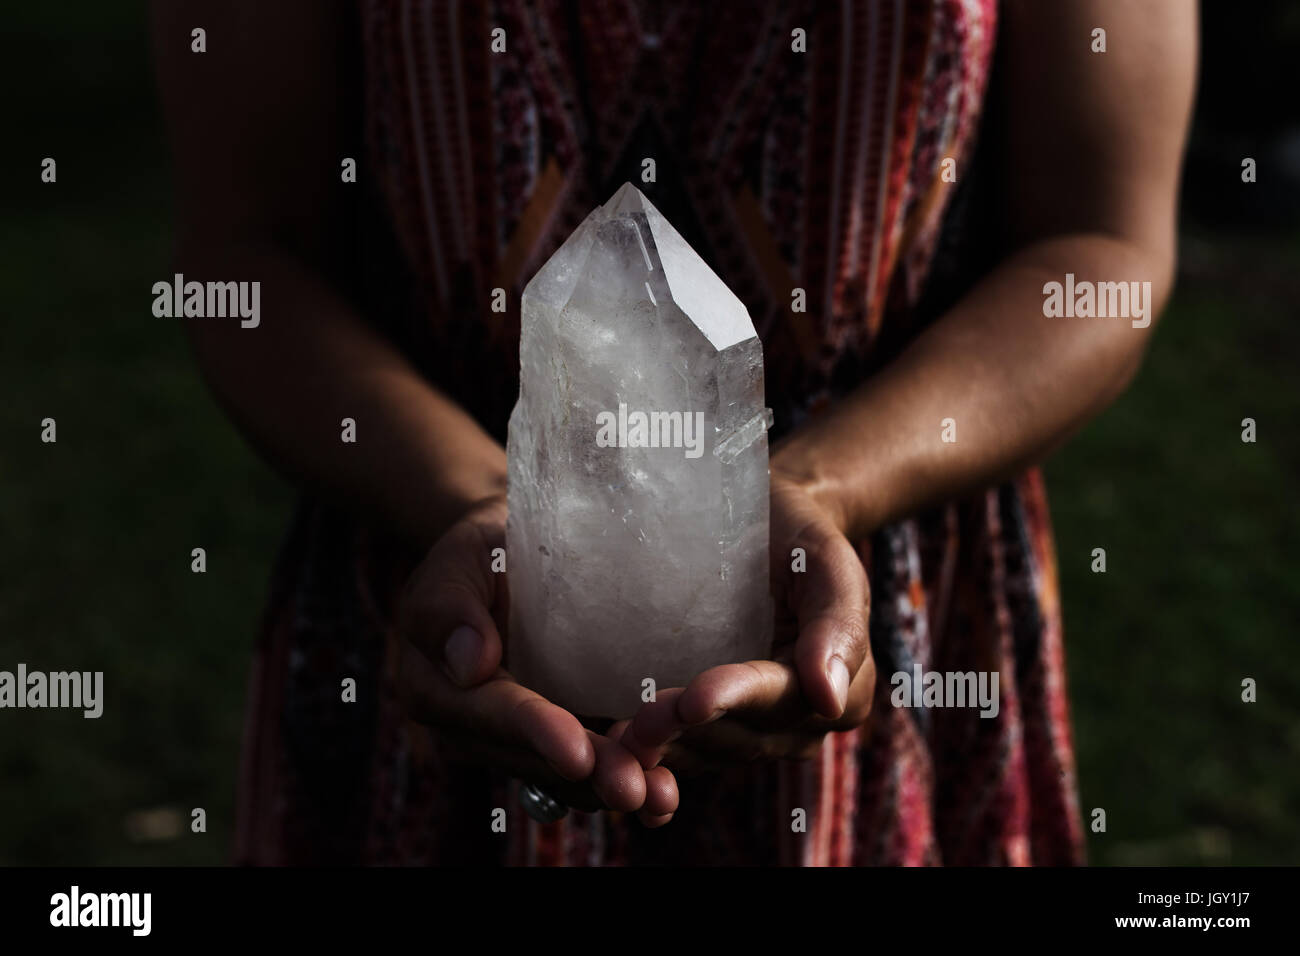 A young woman holding a large, luminous quartz crystal appears powerful in dramatic lighting. Stock Photo